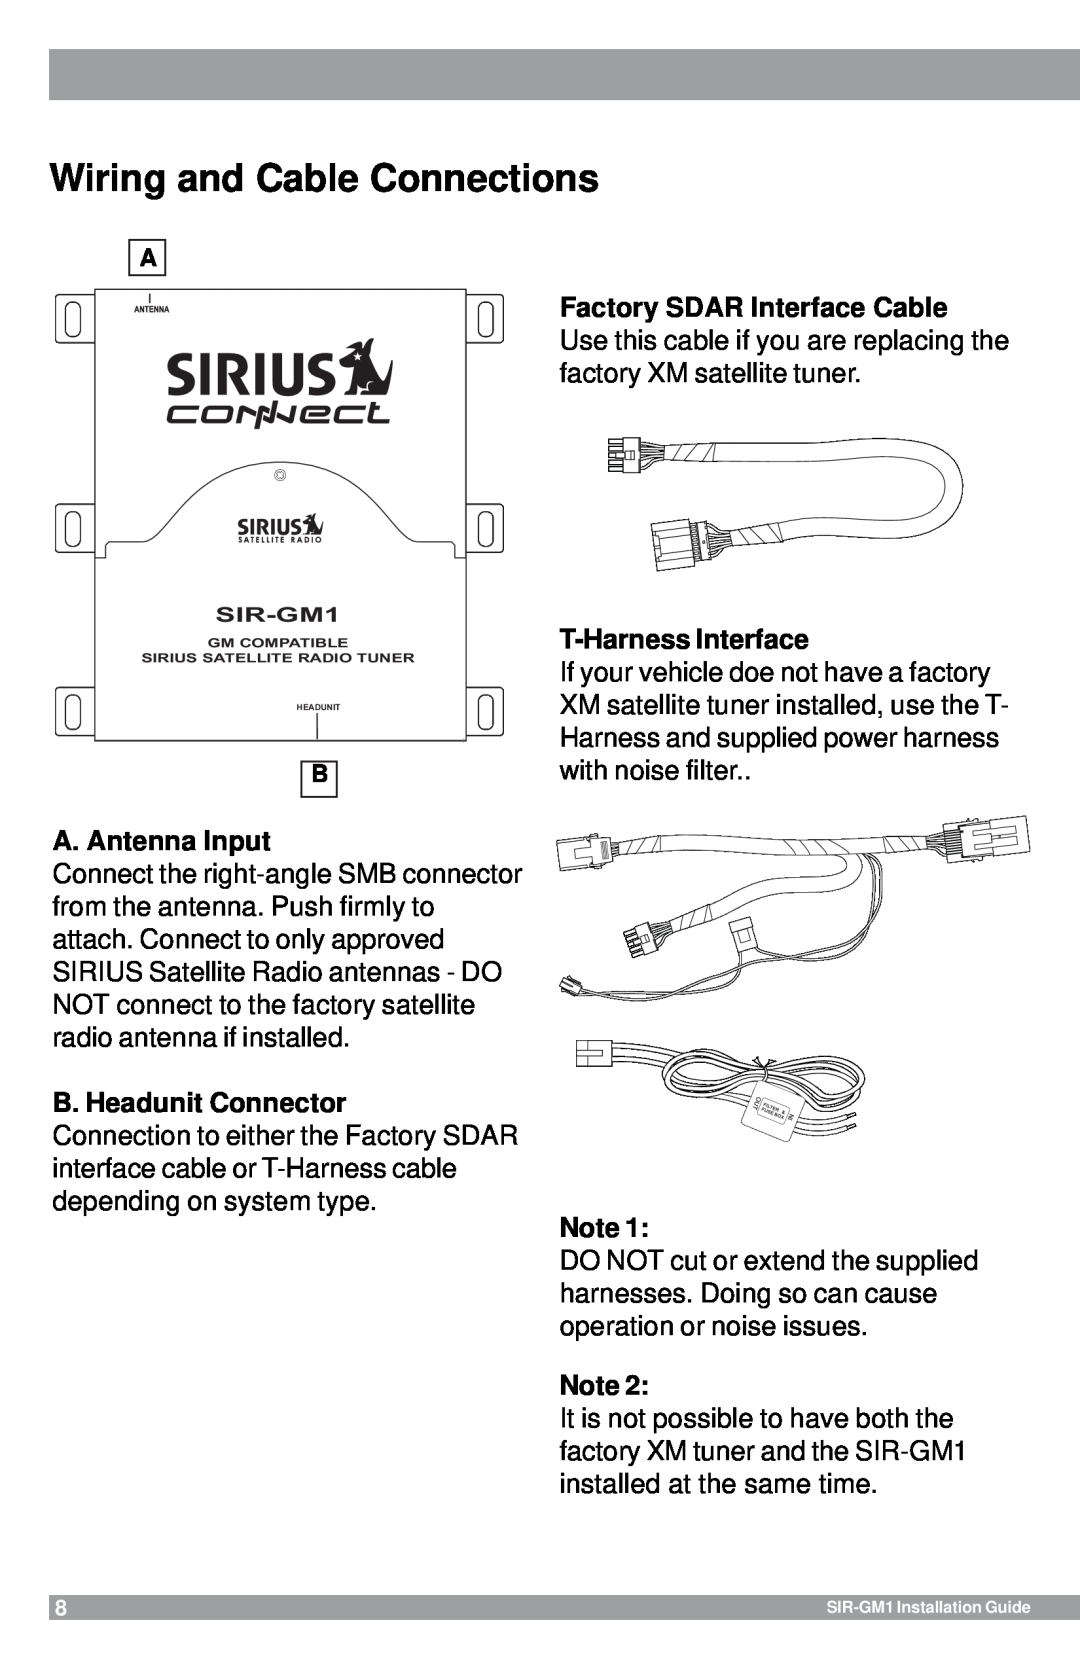 Sirius Satellite Radio SIR-GM1 Wiring and Cable Connections, A. Antenna Input, B. Headunit Connector, T-HarnessInterface 